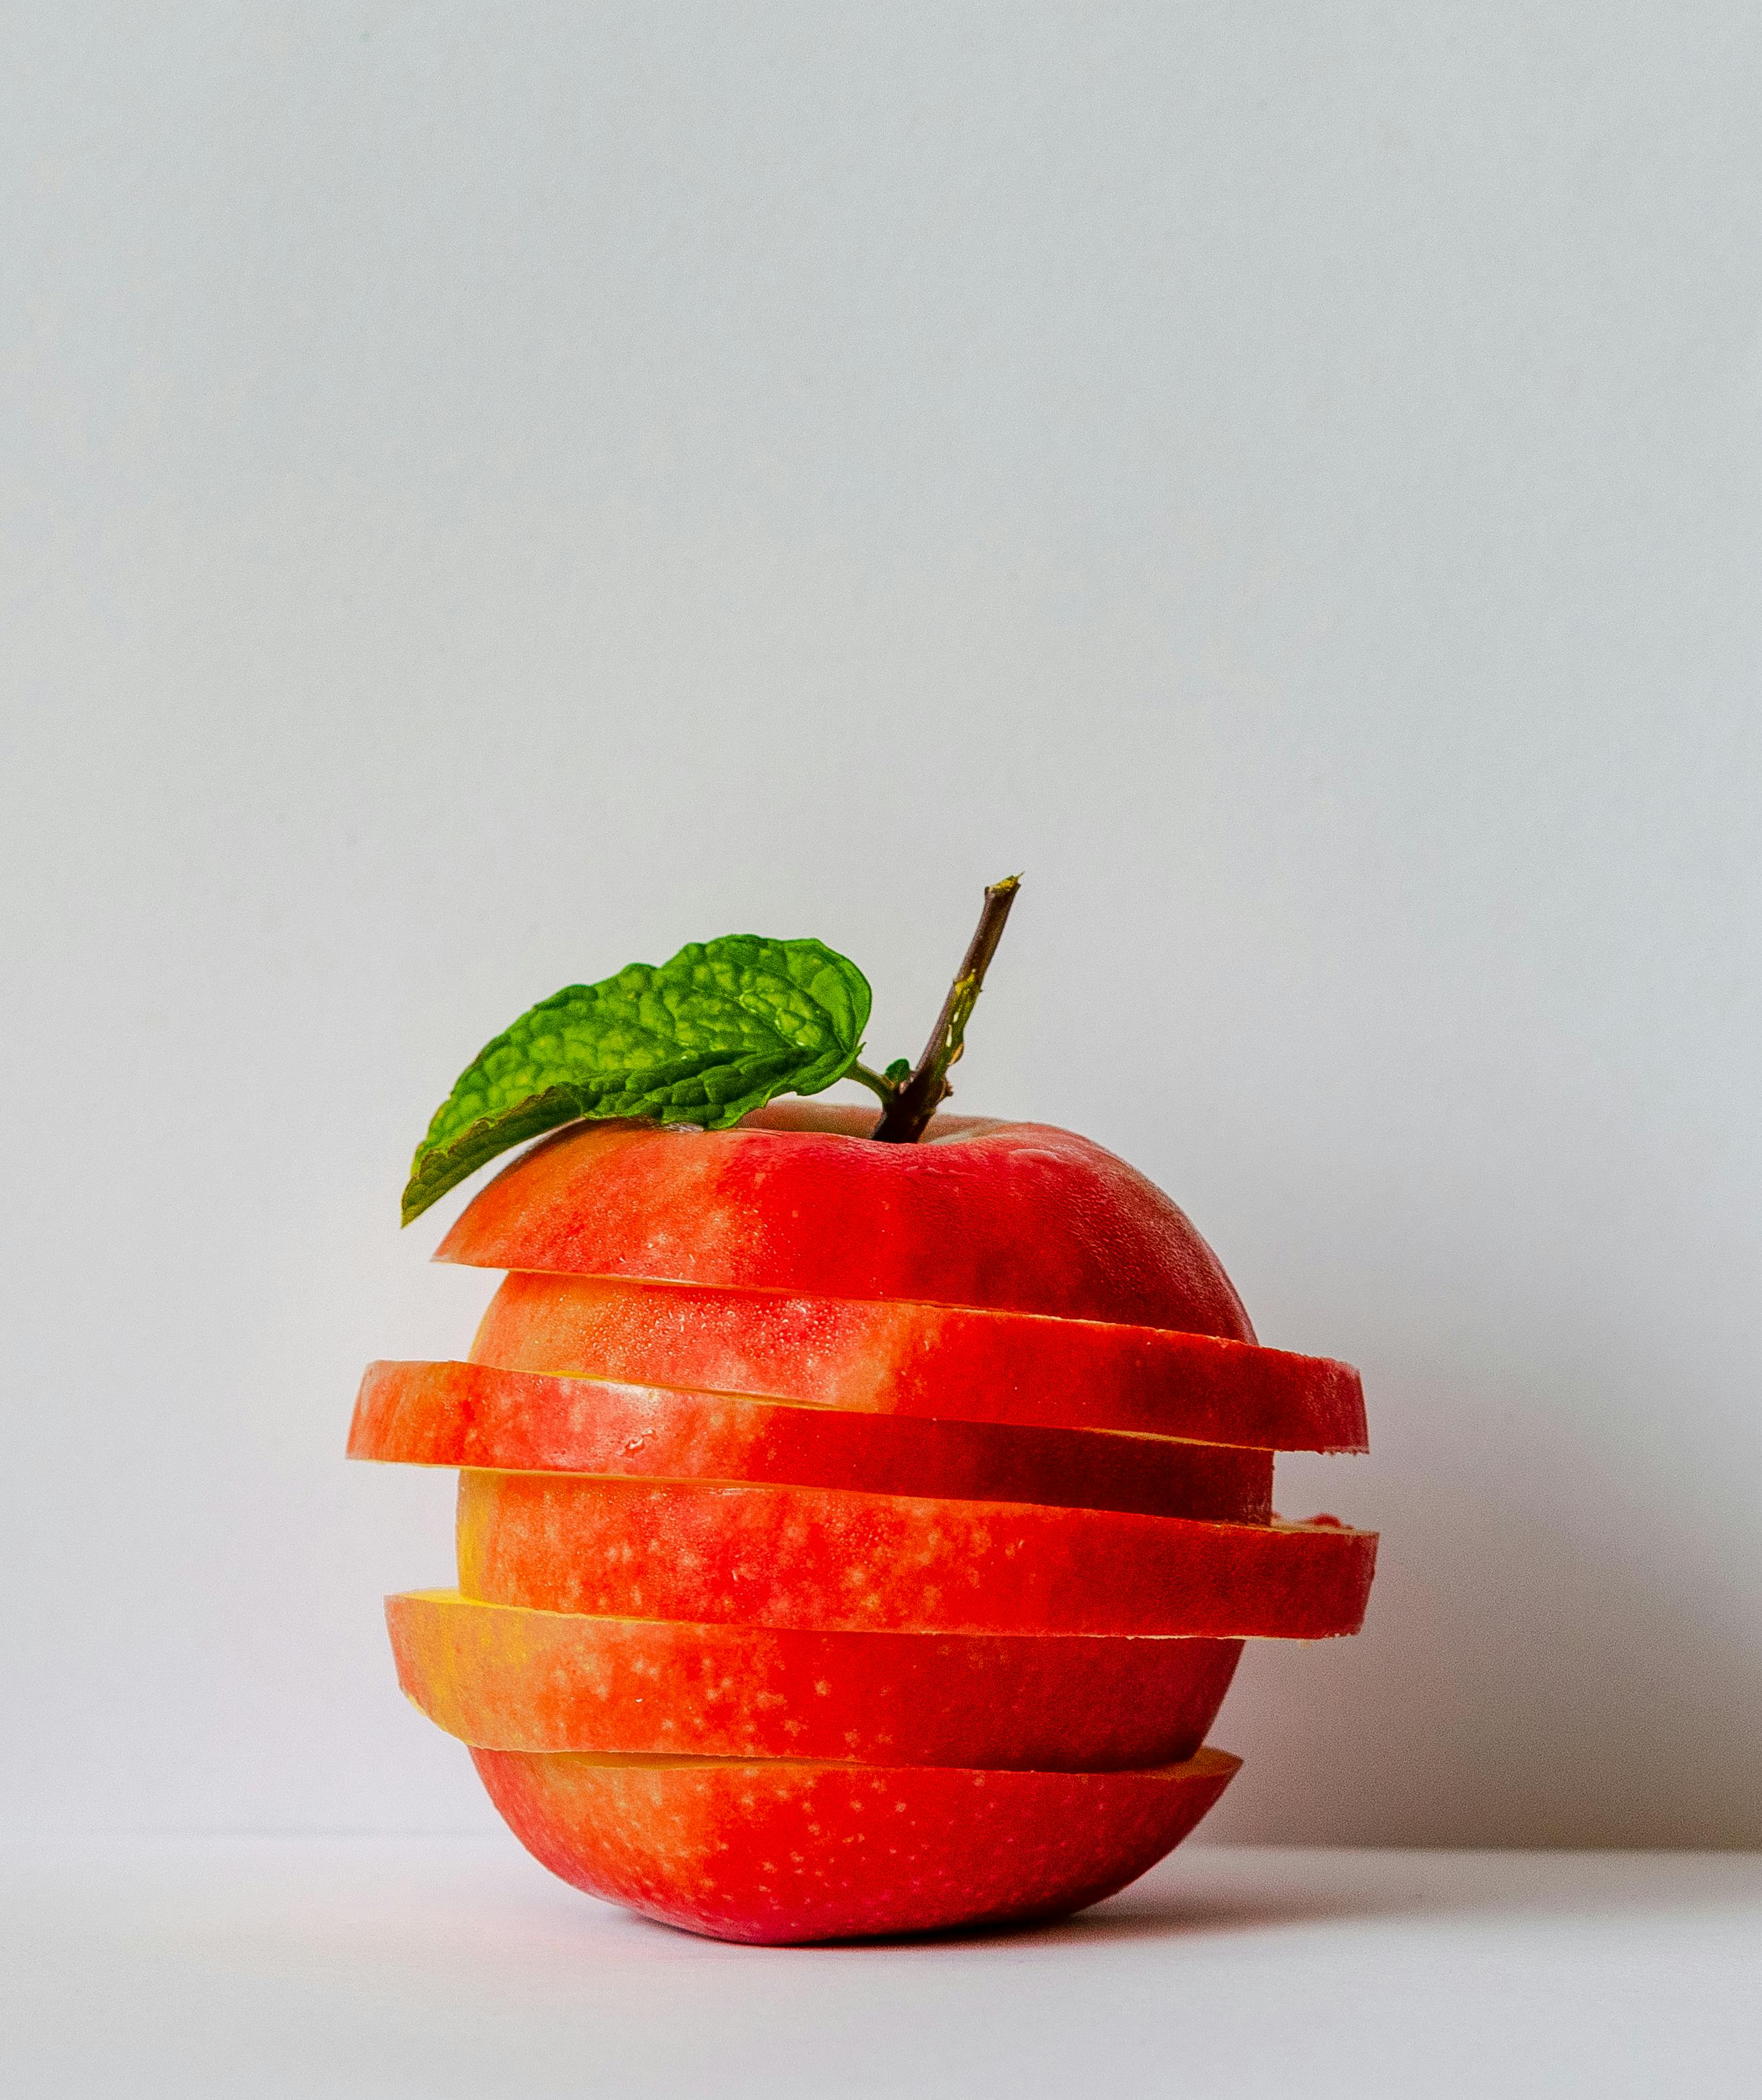 BENEFITS OF EATING APPLE EVERY DAY